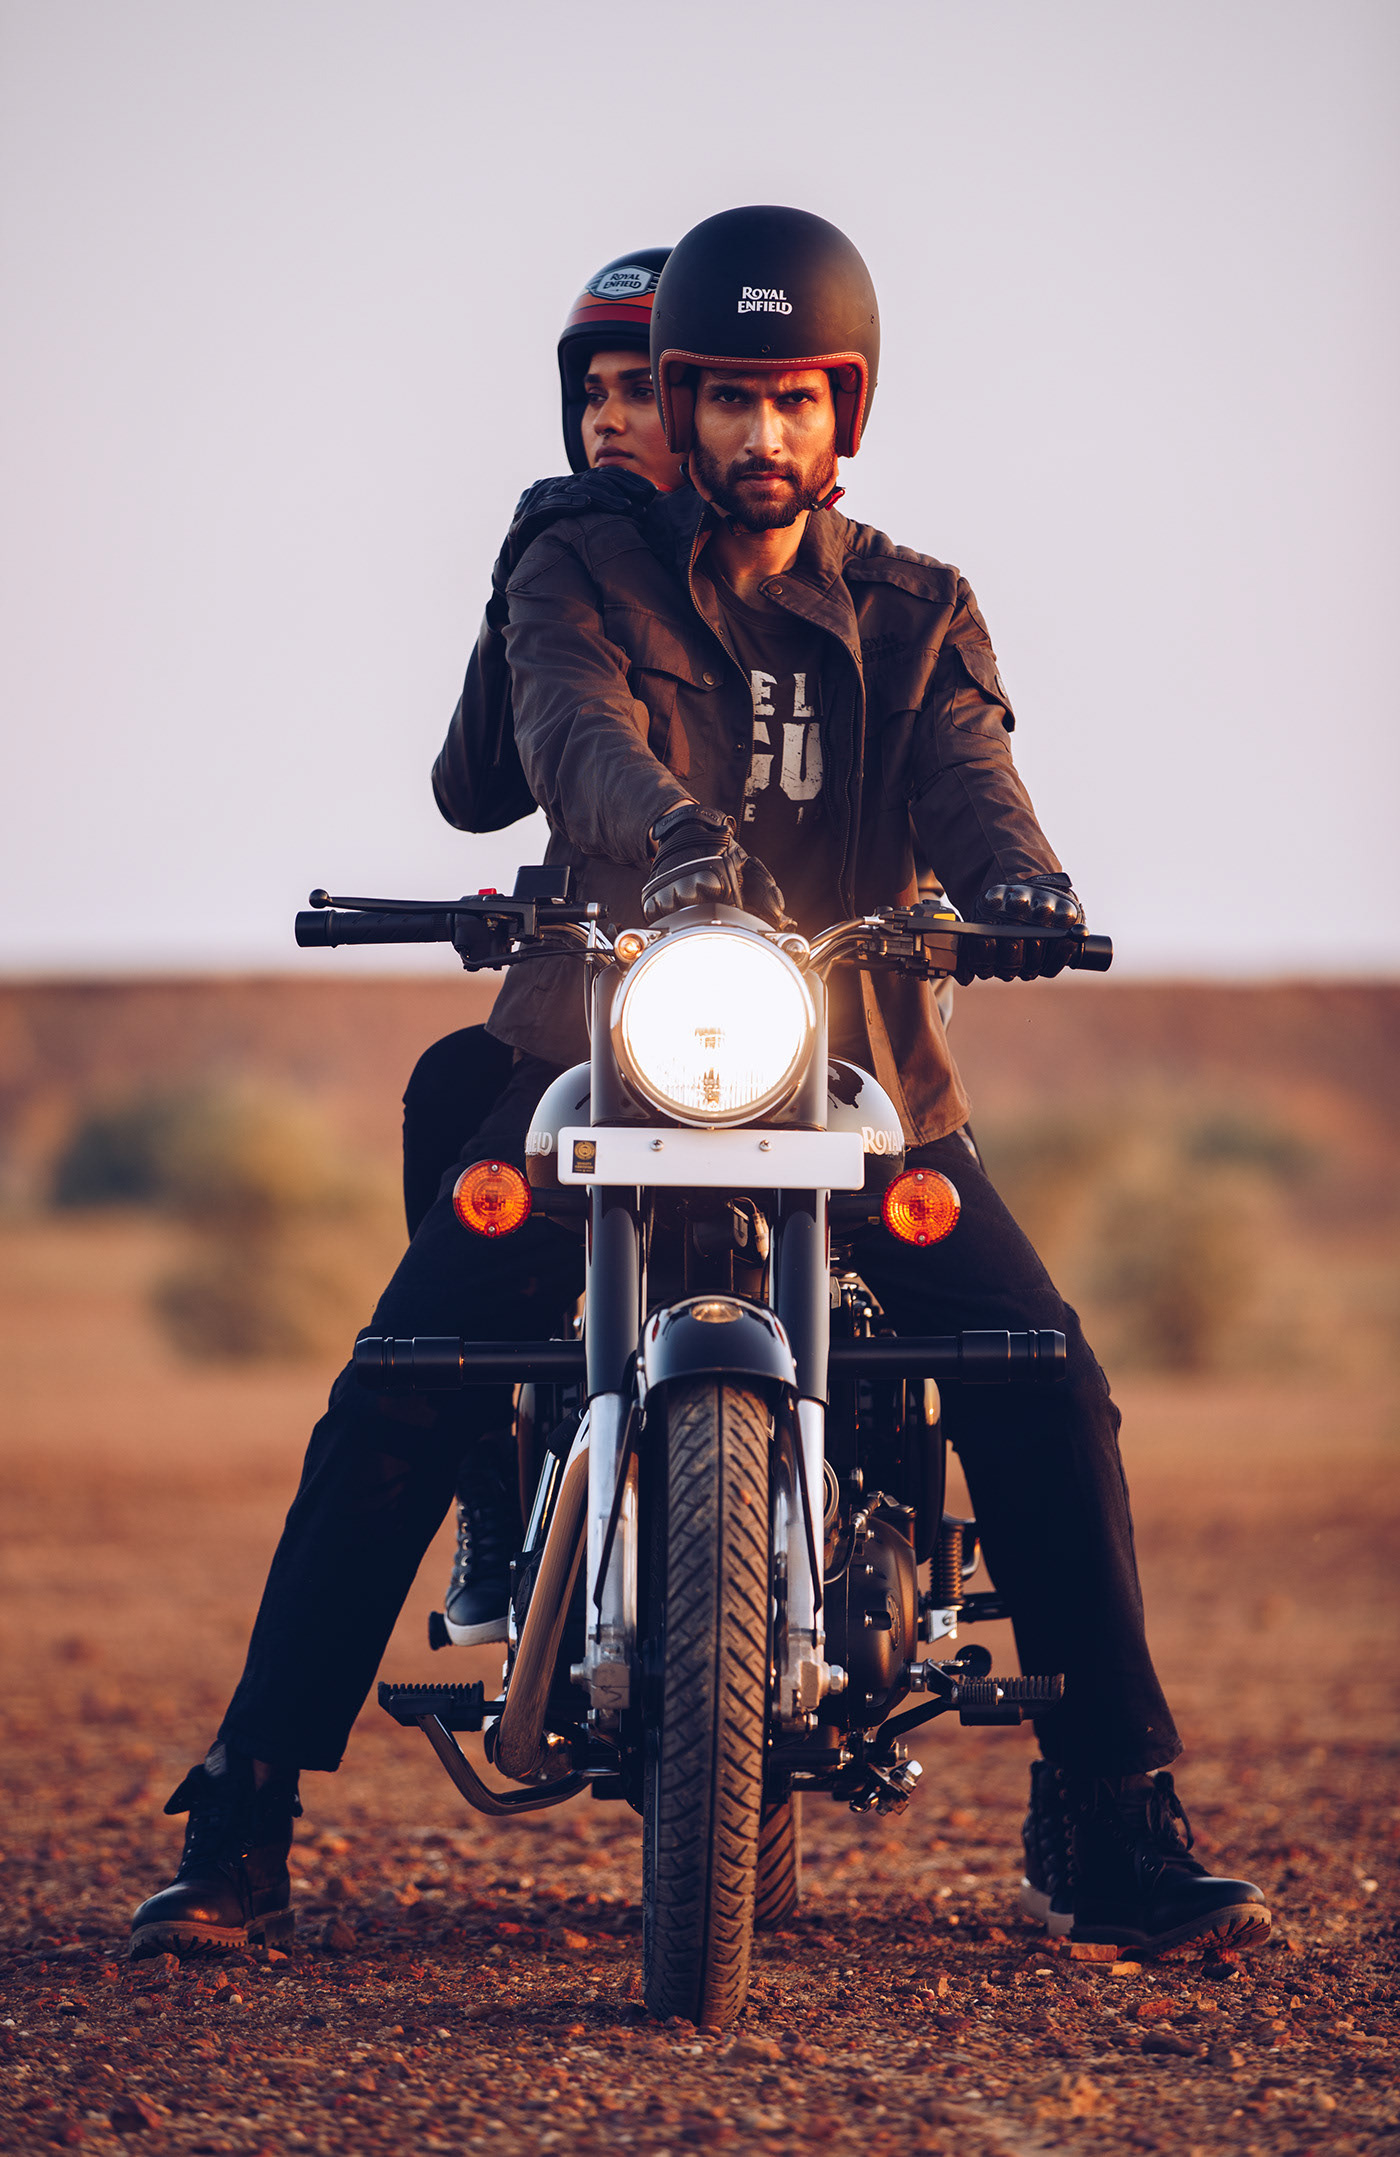 producer production manager Photography  royal enfield classic s motorcycles Rajasthan motorcycle gear bikers photoshoot